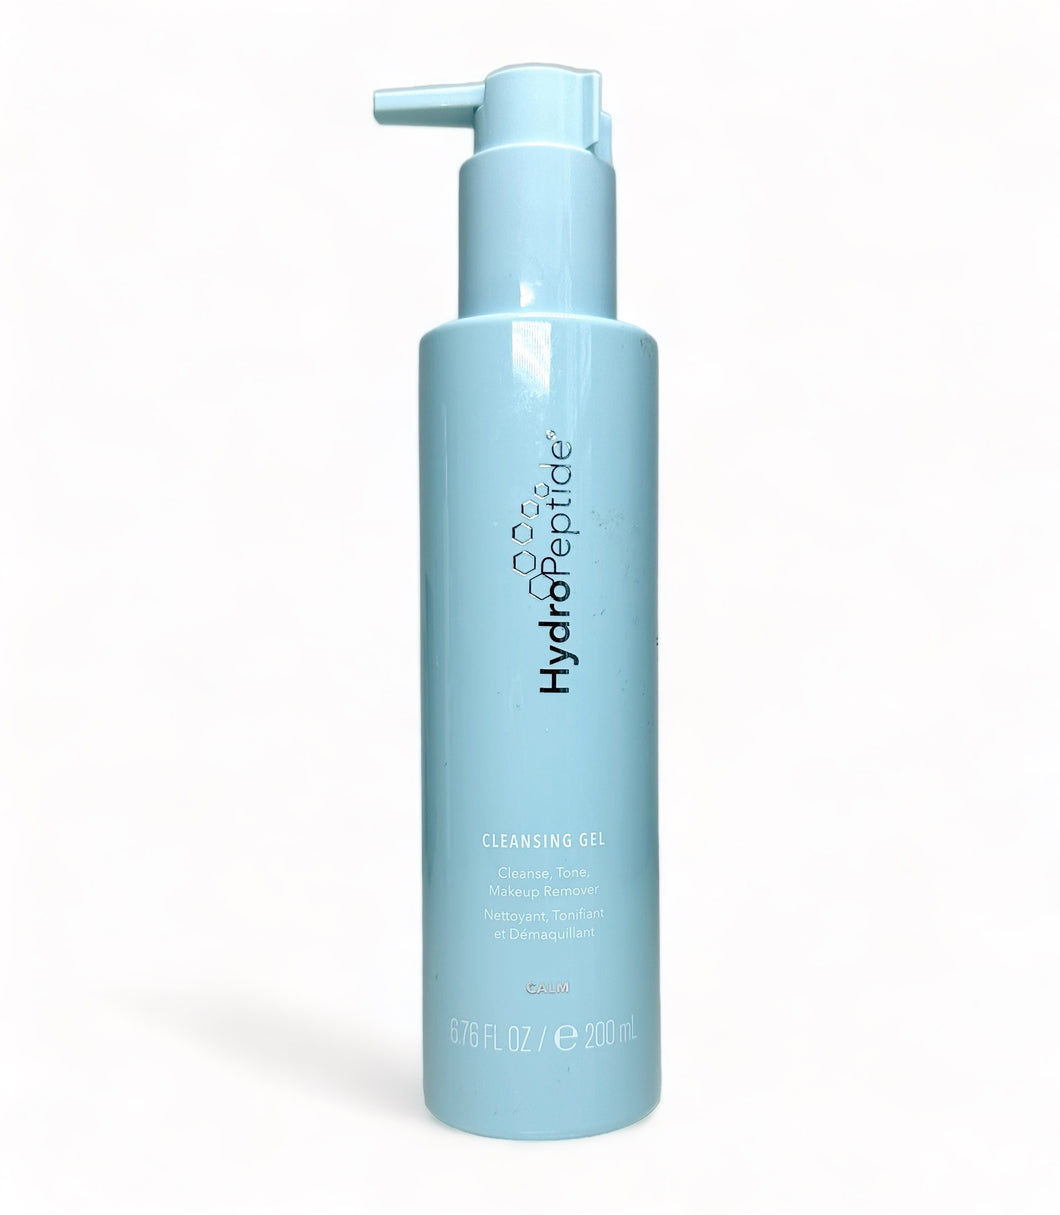 HydroPeptide Cleansing Gel Face Wash